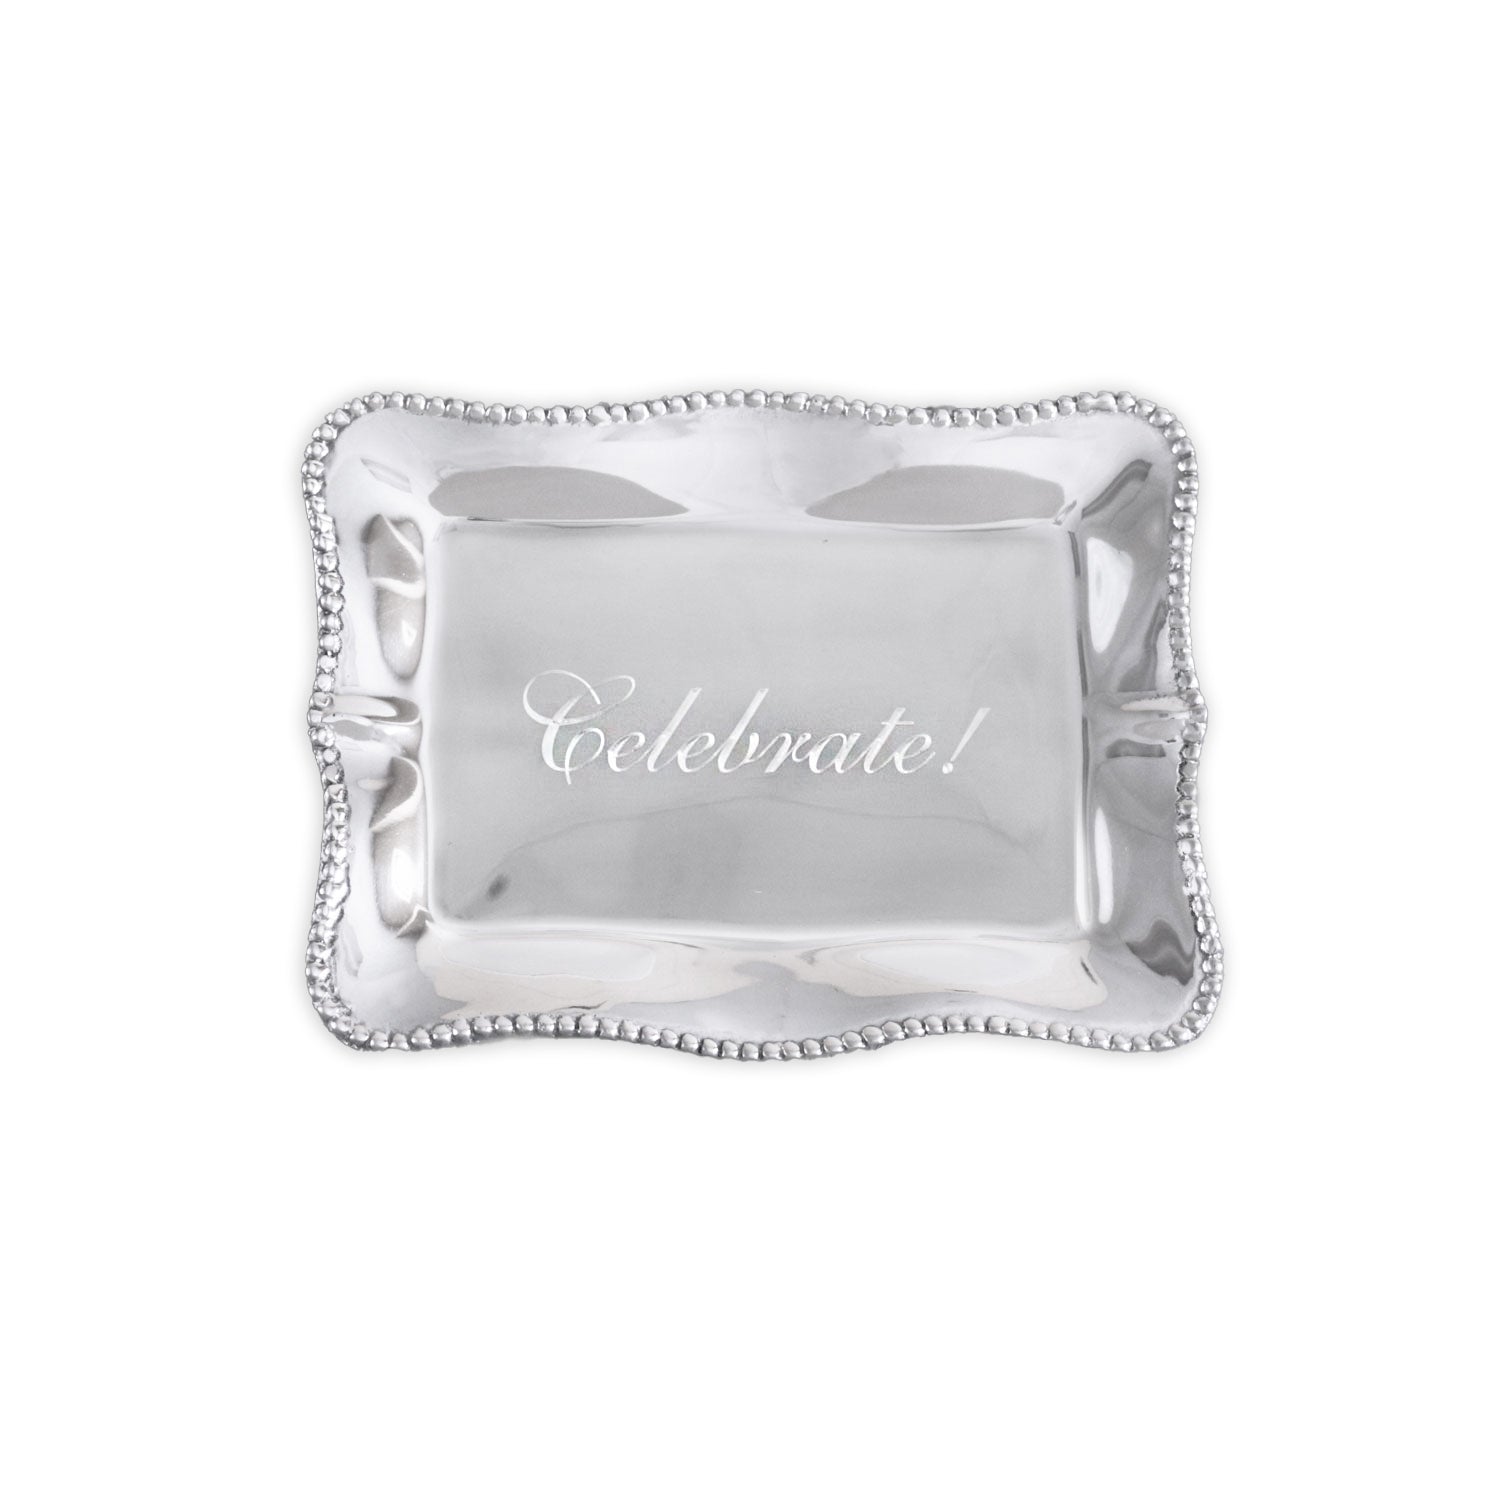 GIFTABLES Pearl Denisse Rectangular Engraved Tray &quot;Celebrate!&quot;